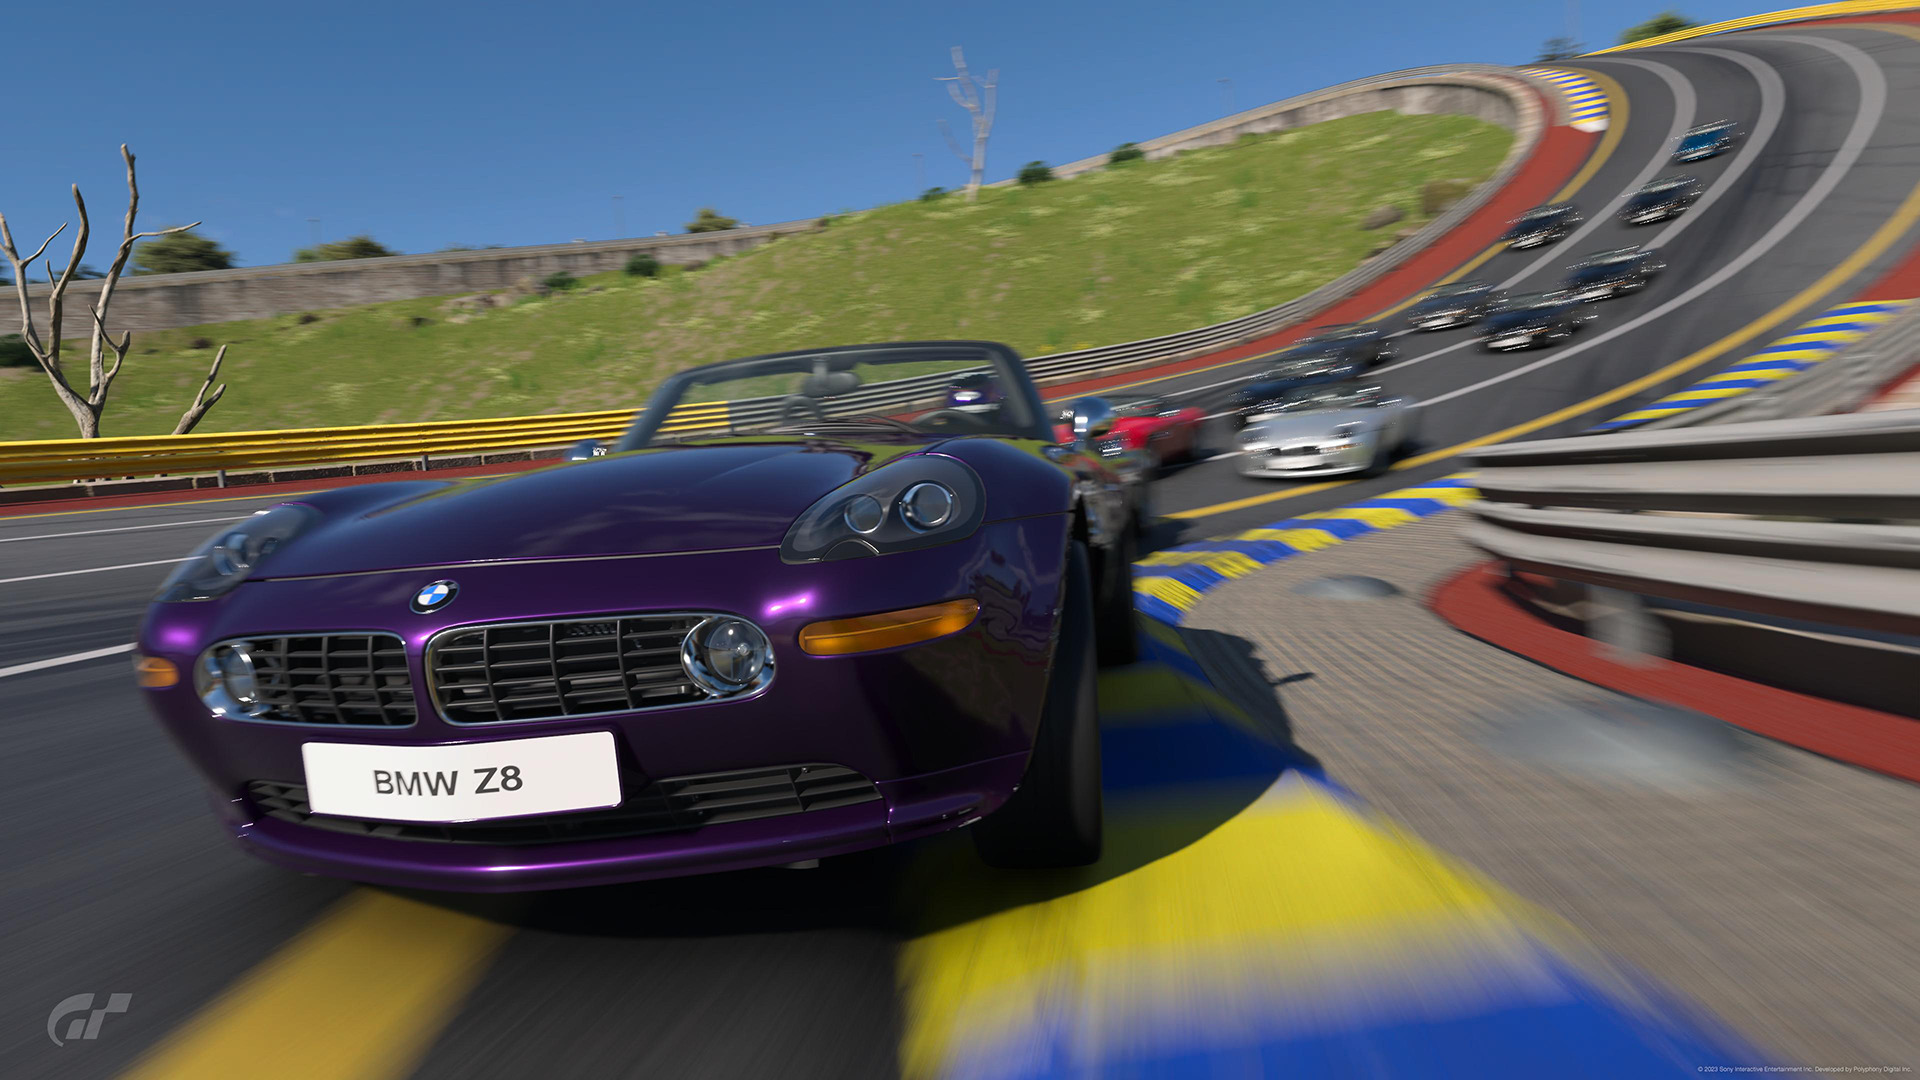 Gran Turismo 7 1.34 Update is Confirmed for May 25 – GTPlanet